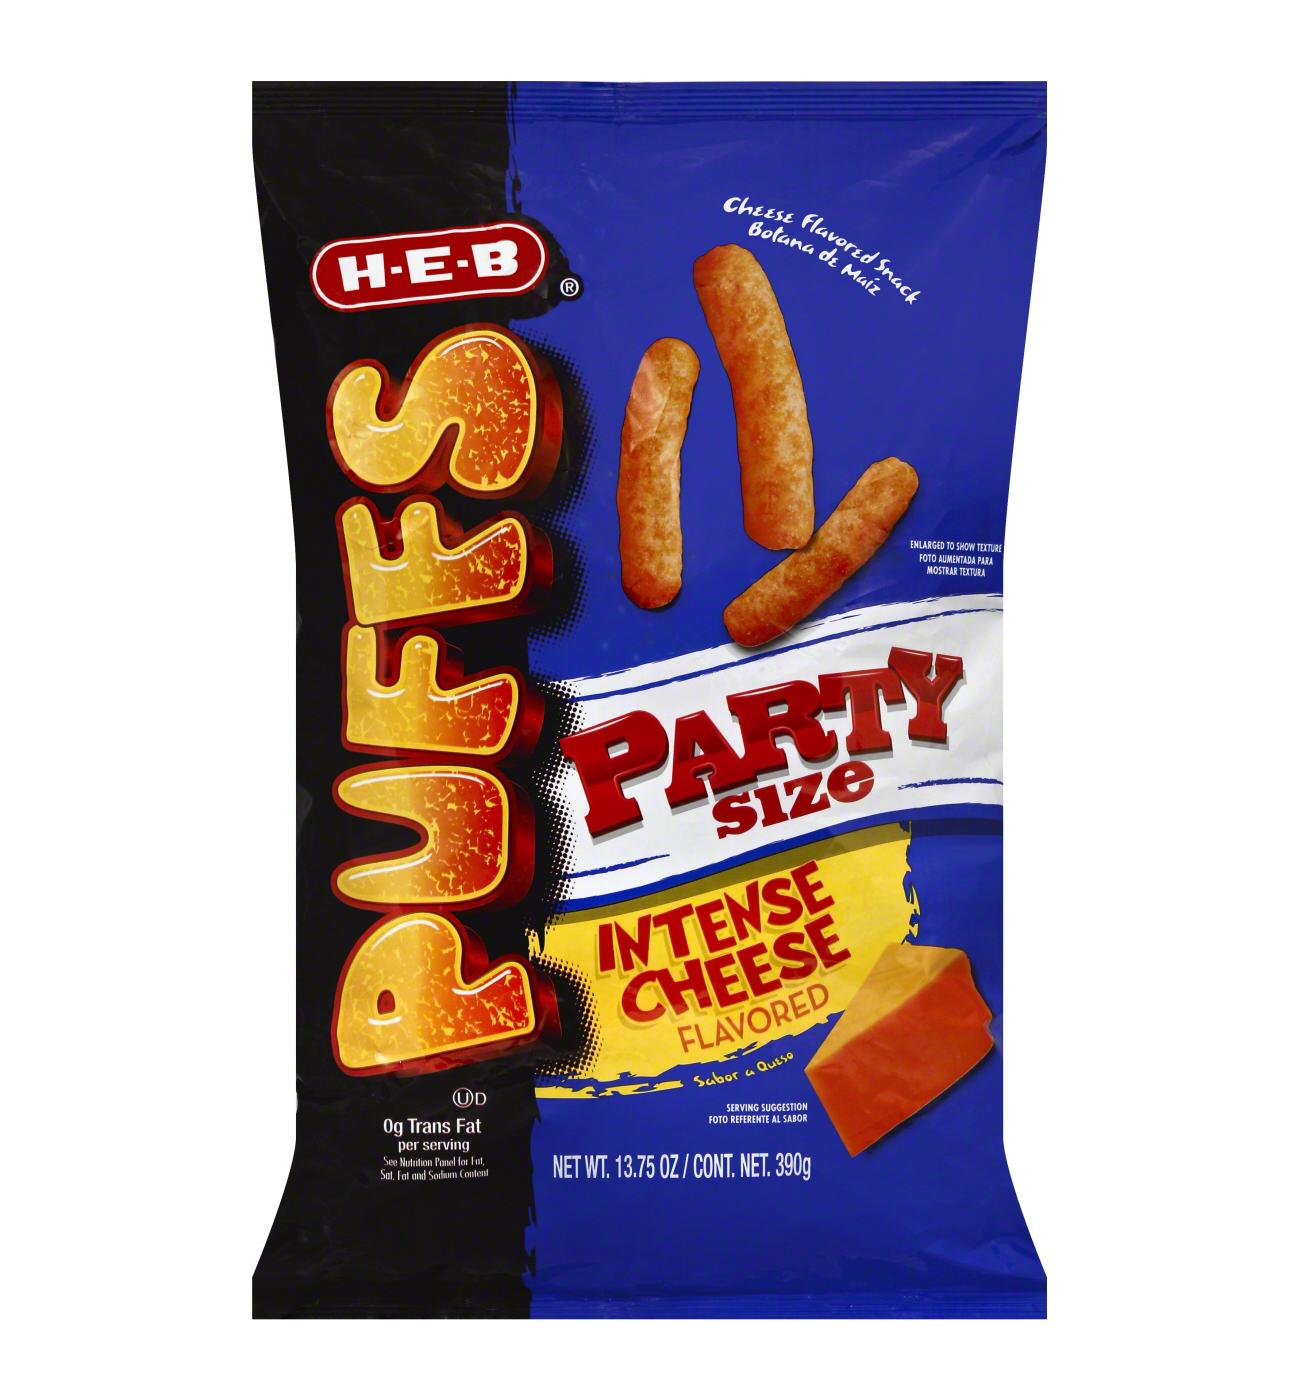 H-E-B Intense Cheese-Flavored Cheese Puffs - Party Size; image 1 of 2